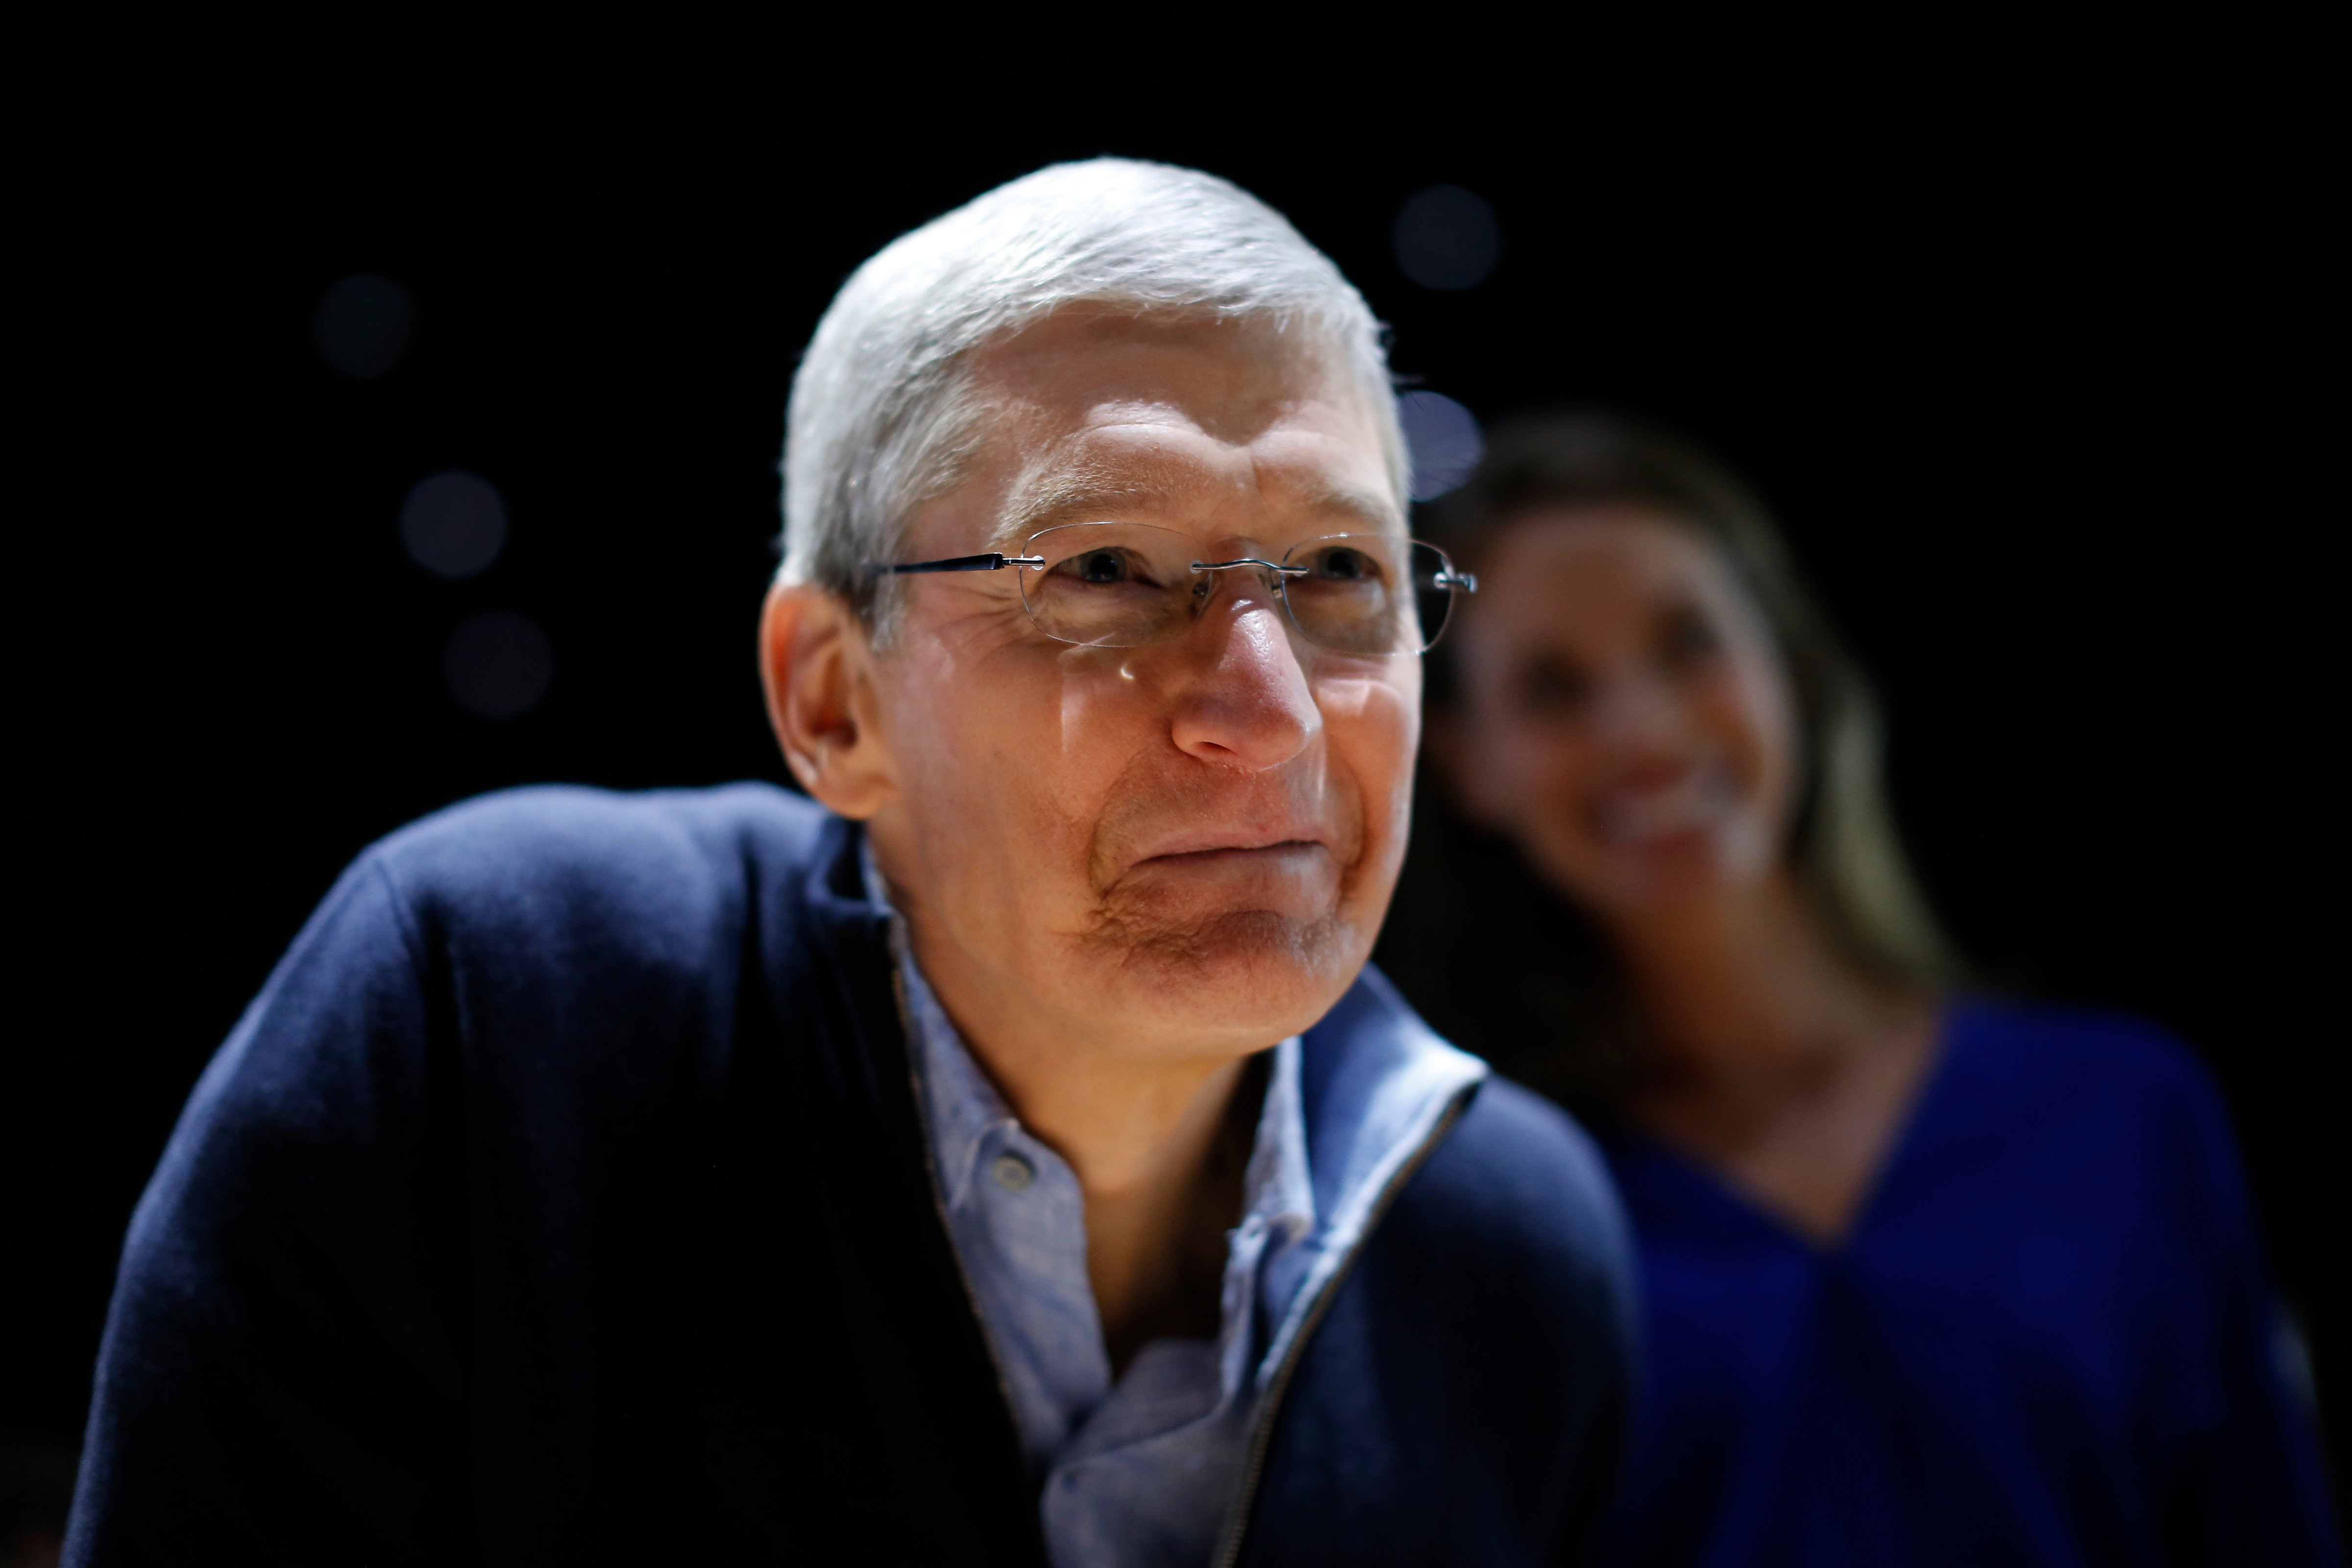 Apple CEO Tim Cook attends an Apple special event at the Yerba Buena Center for the Arts in San Francisco, on March 9, 2015 (Stephen Lam—Getty Images)